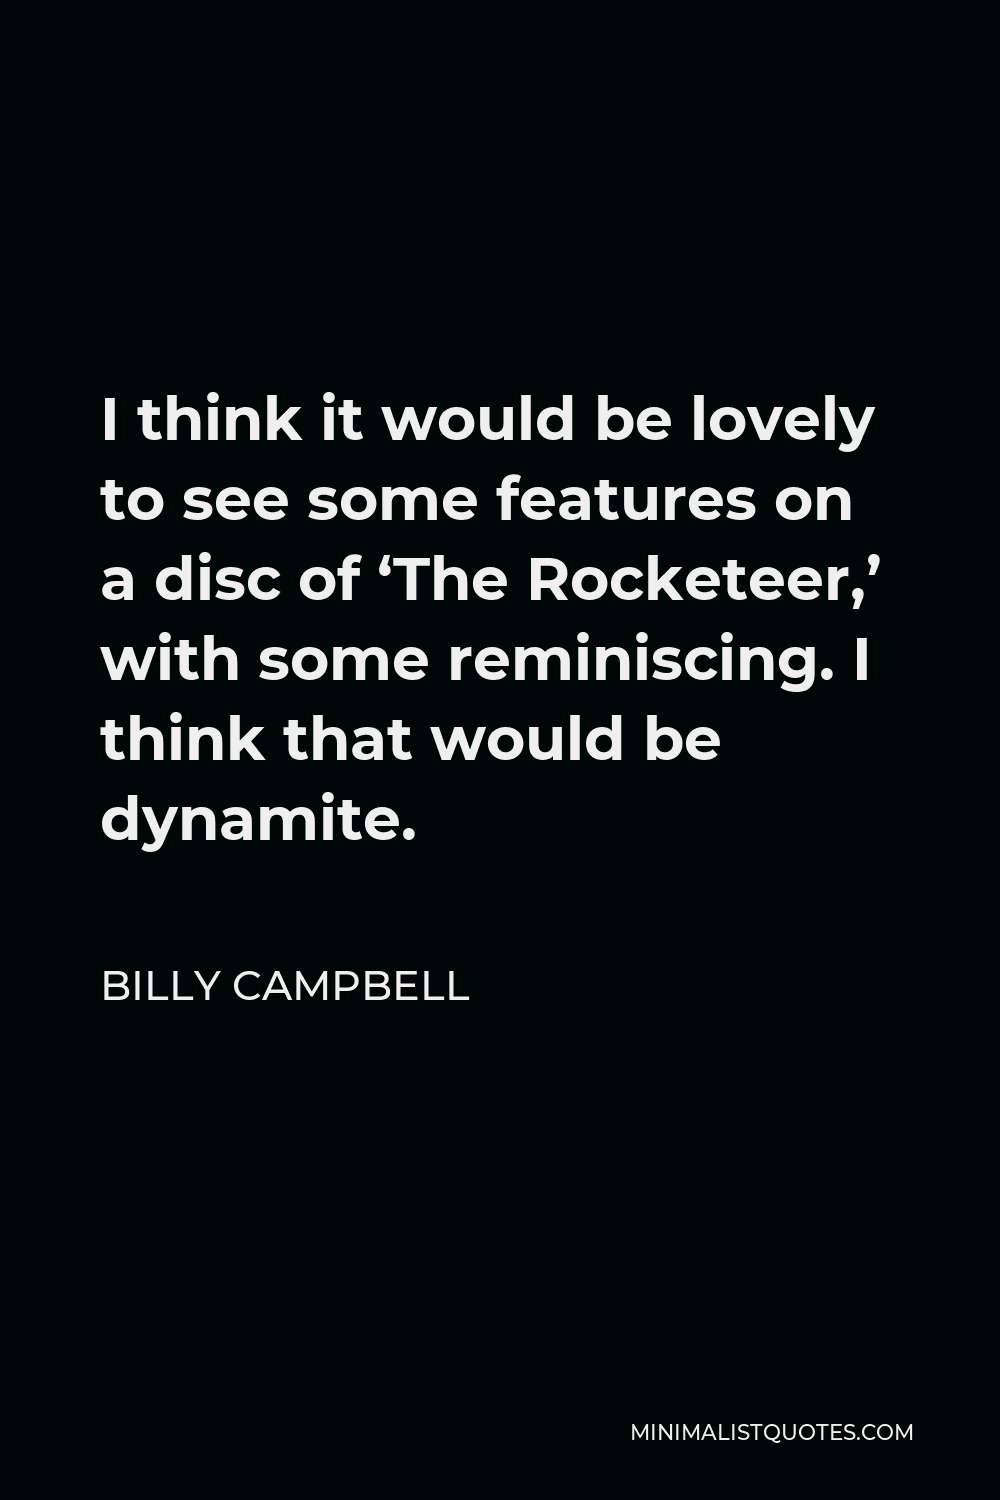 Billy Campbell Quote - I think it would be lovely to see some features on a disc of ‘The Rocketeer,’ with some reminiscing. I think that would be dynamite.